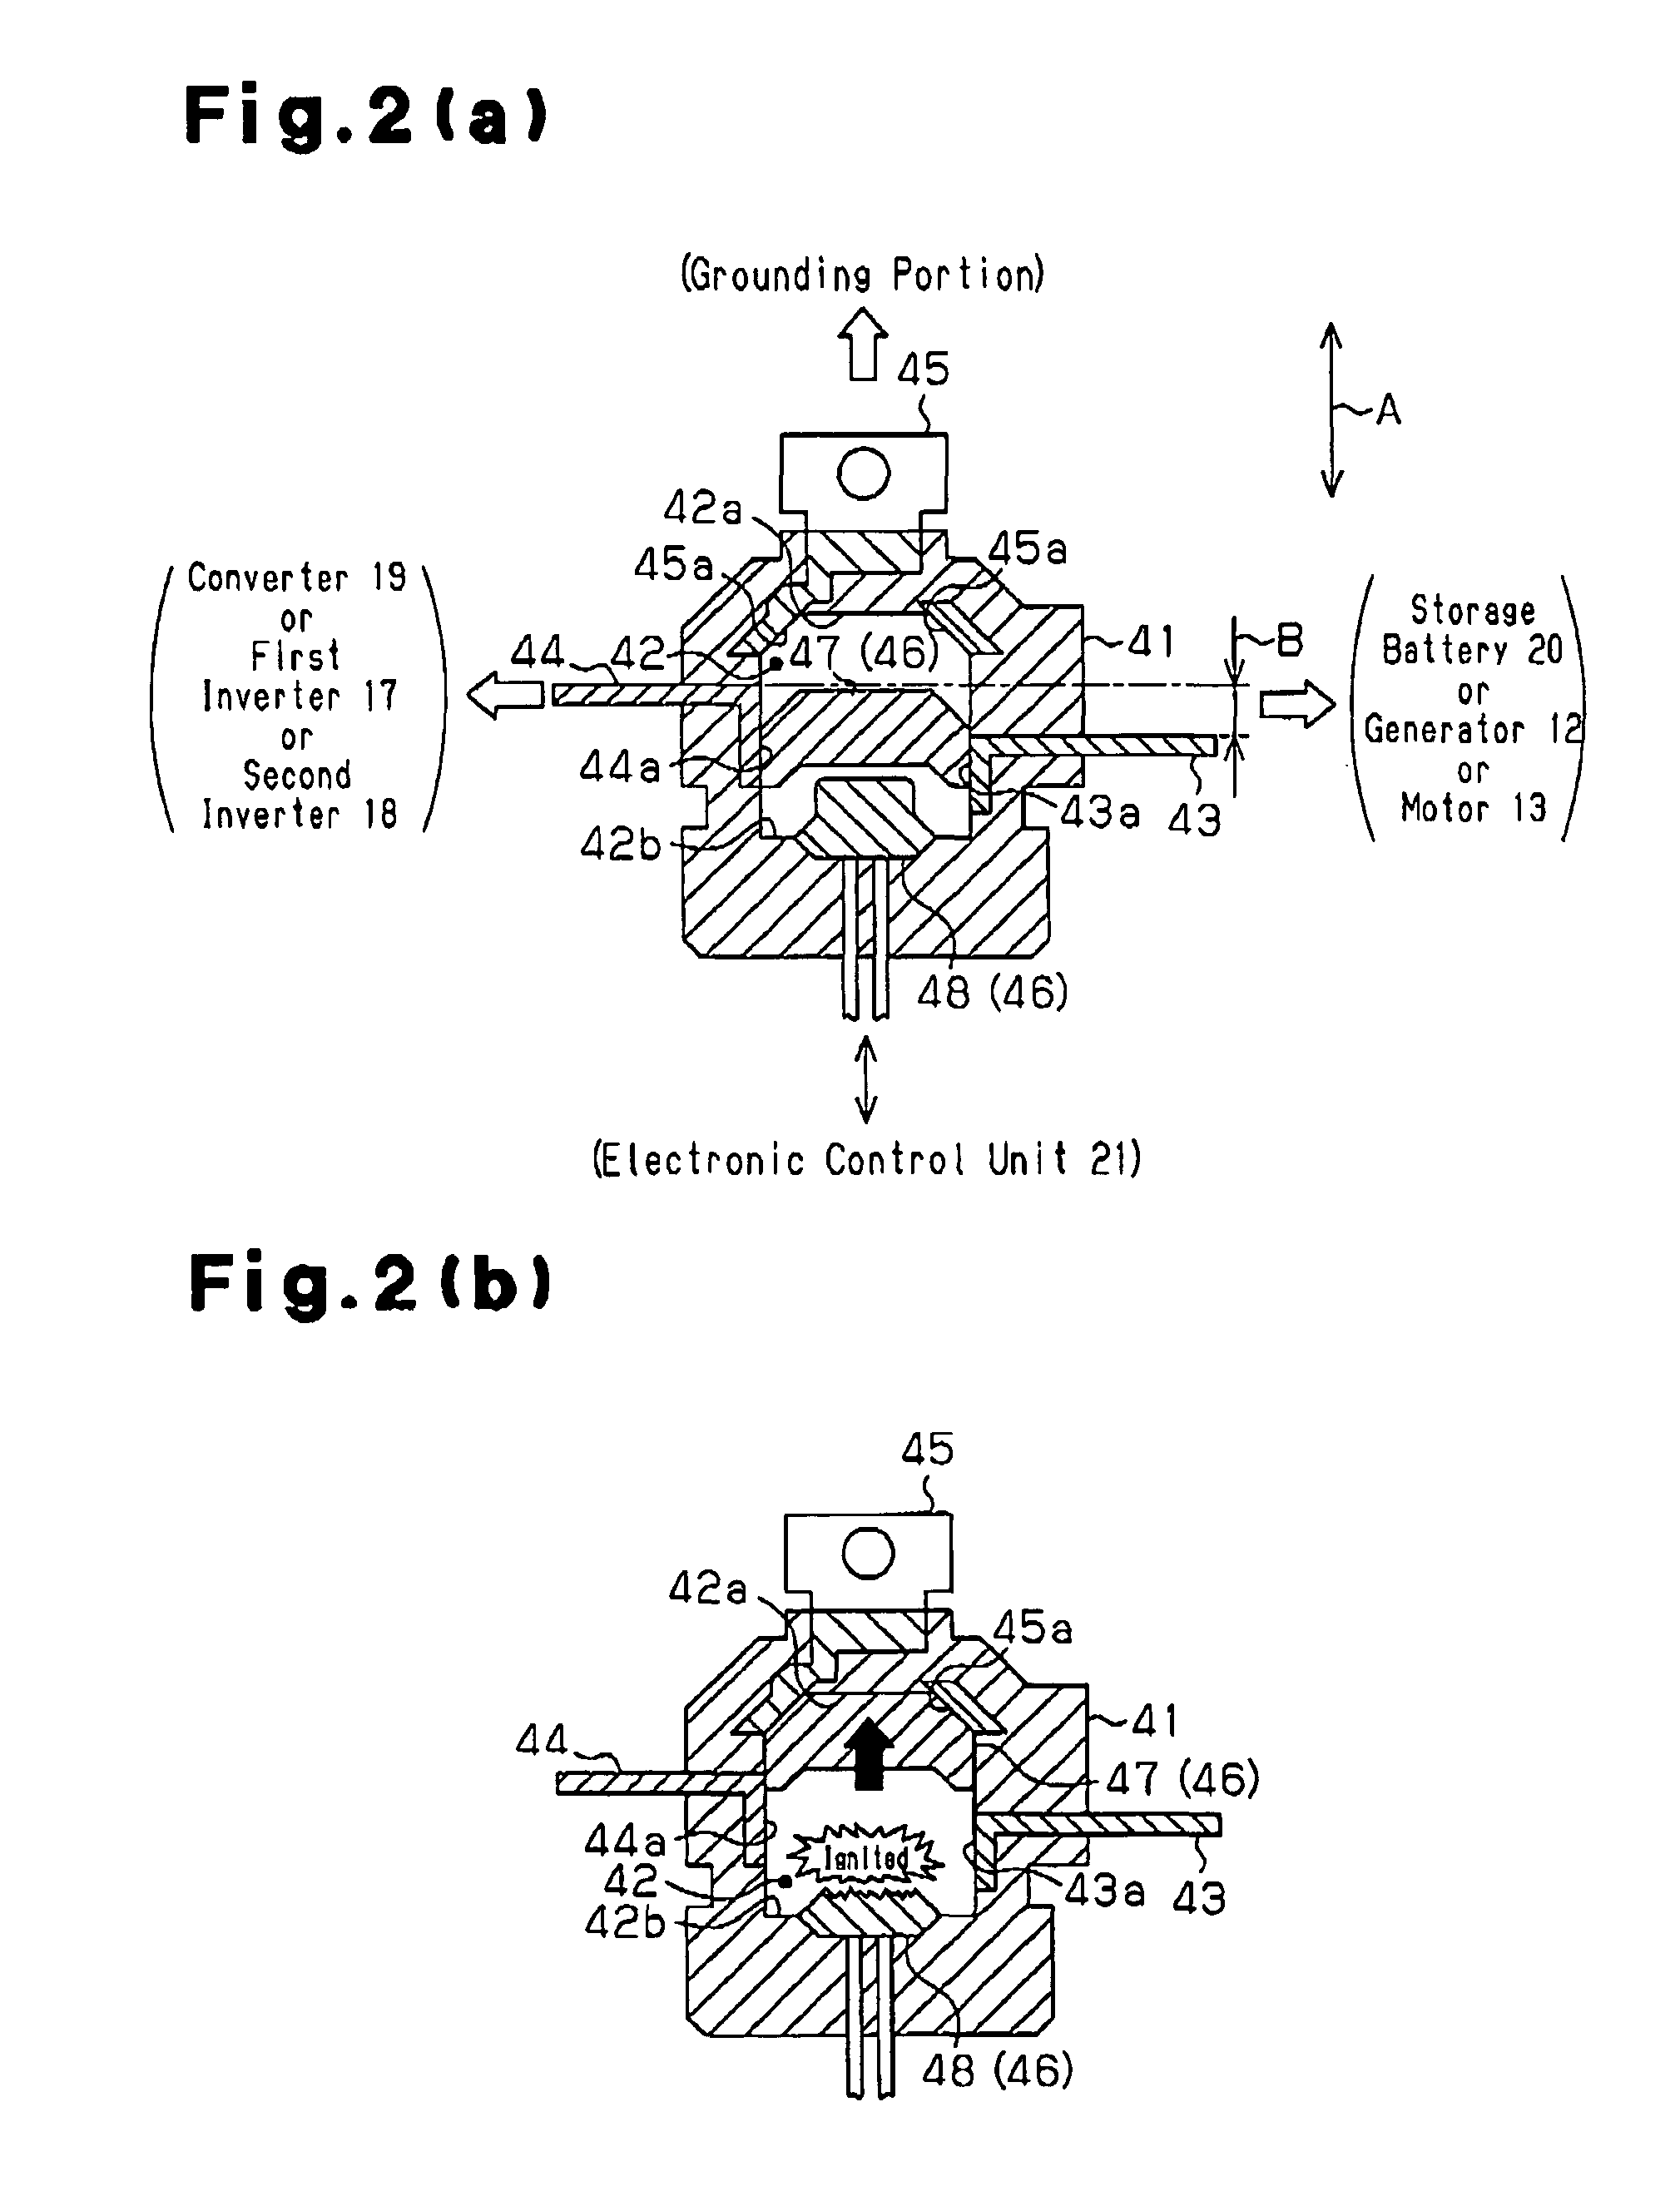 Electric circuit breaker apparatus for vehicle